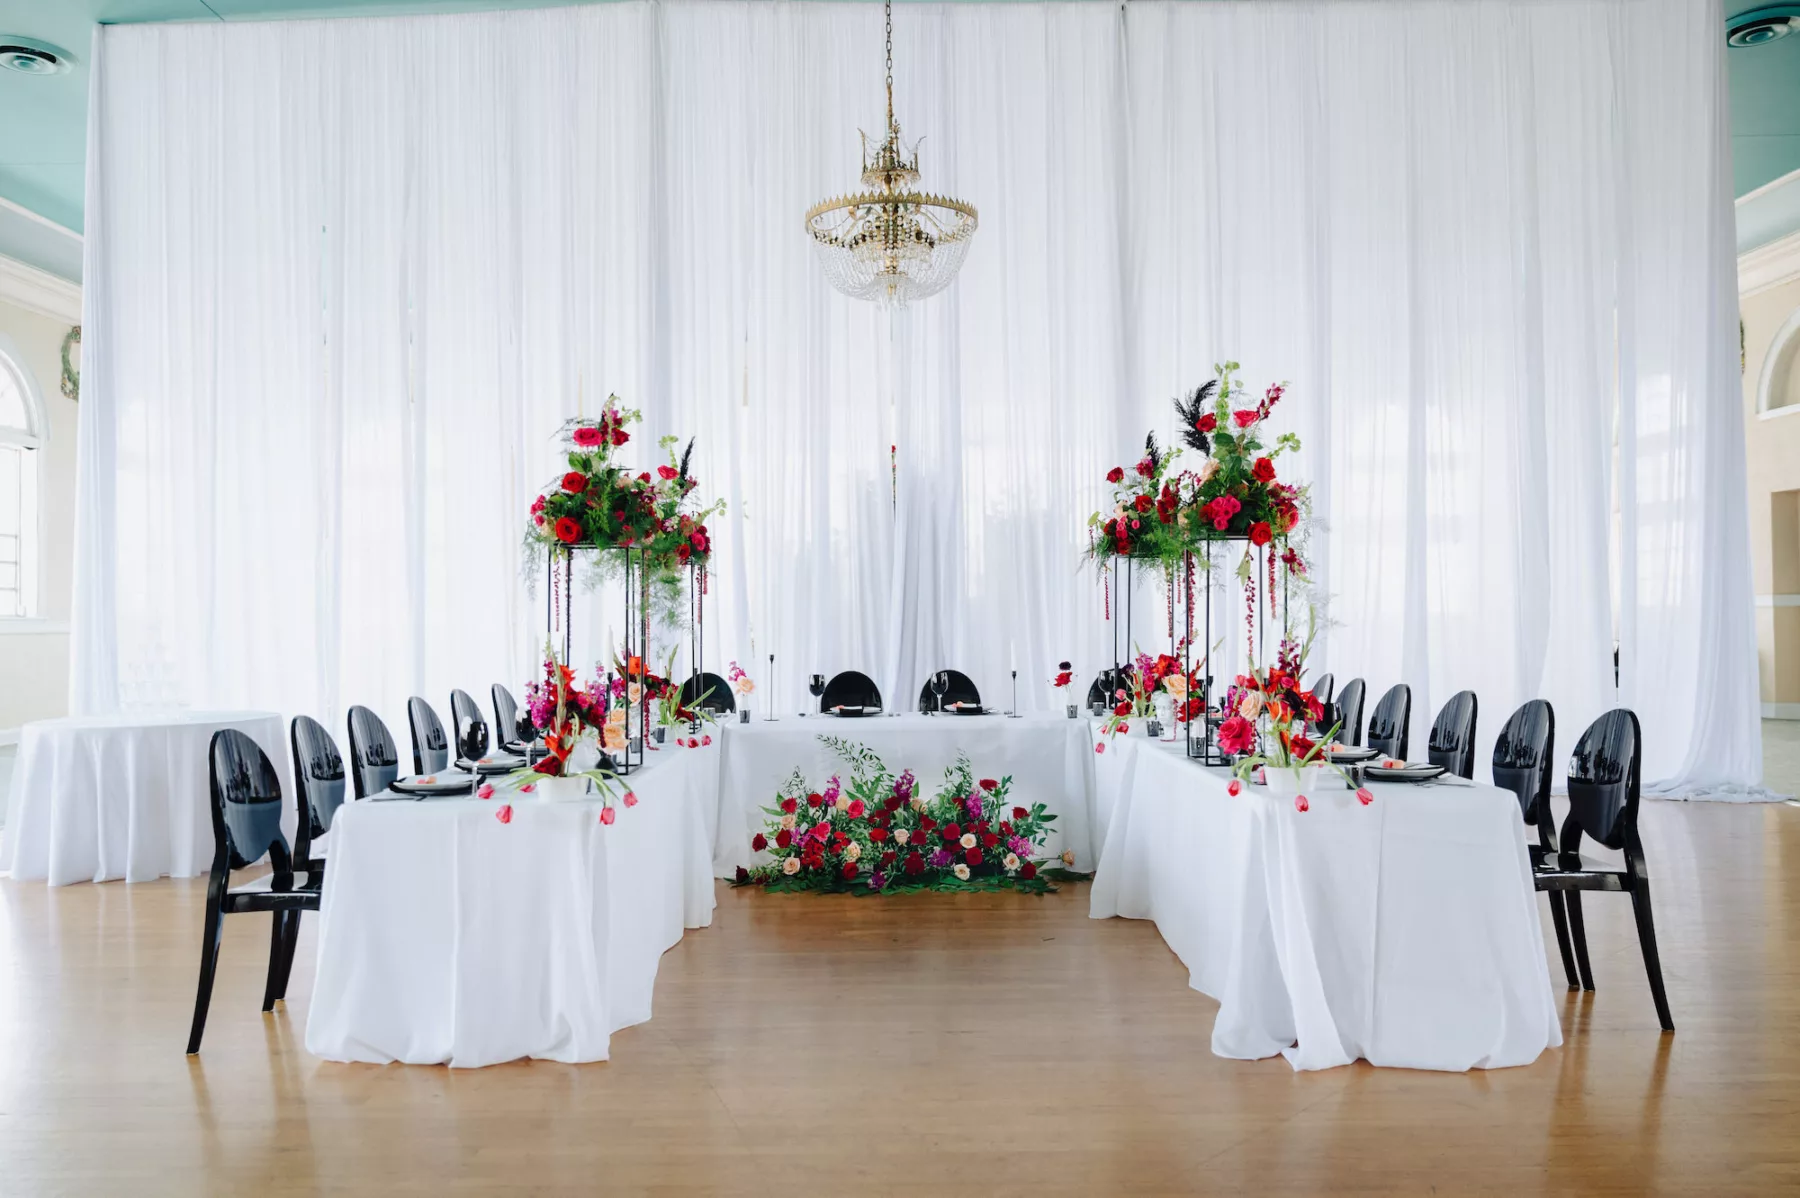 Intimate Modern Black and Pink Italian Inspired Wedding Reception | U-Shaped Table Setting | Greenery, Pink and Red Rose Flower Arrangement Decor Ideas | Tampa Bay Florist Save The Date Florida | Ybor Event Planner Eventfull Weddings | Rentals A Chair Affair | Venue Cuban Club